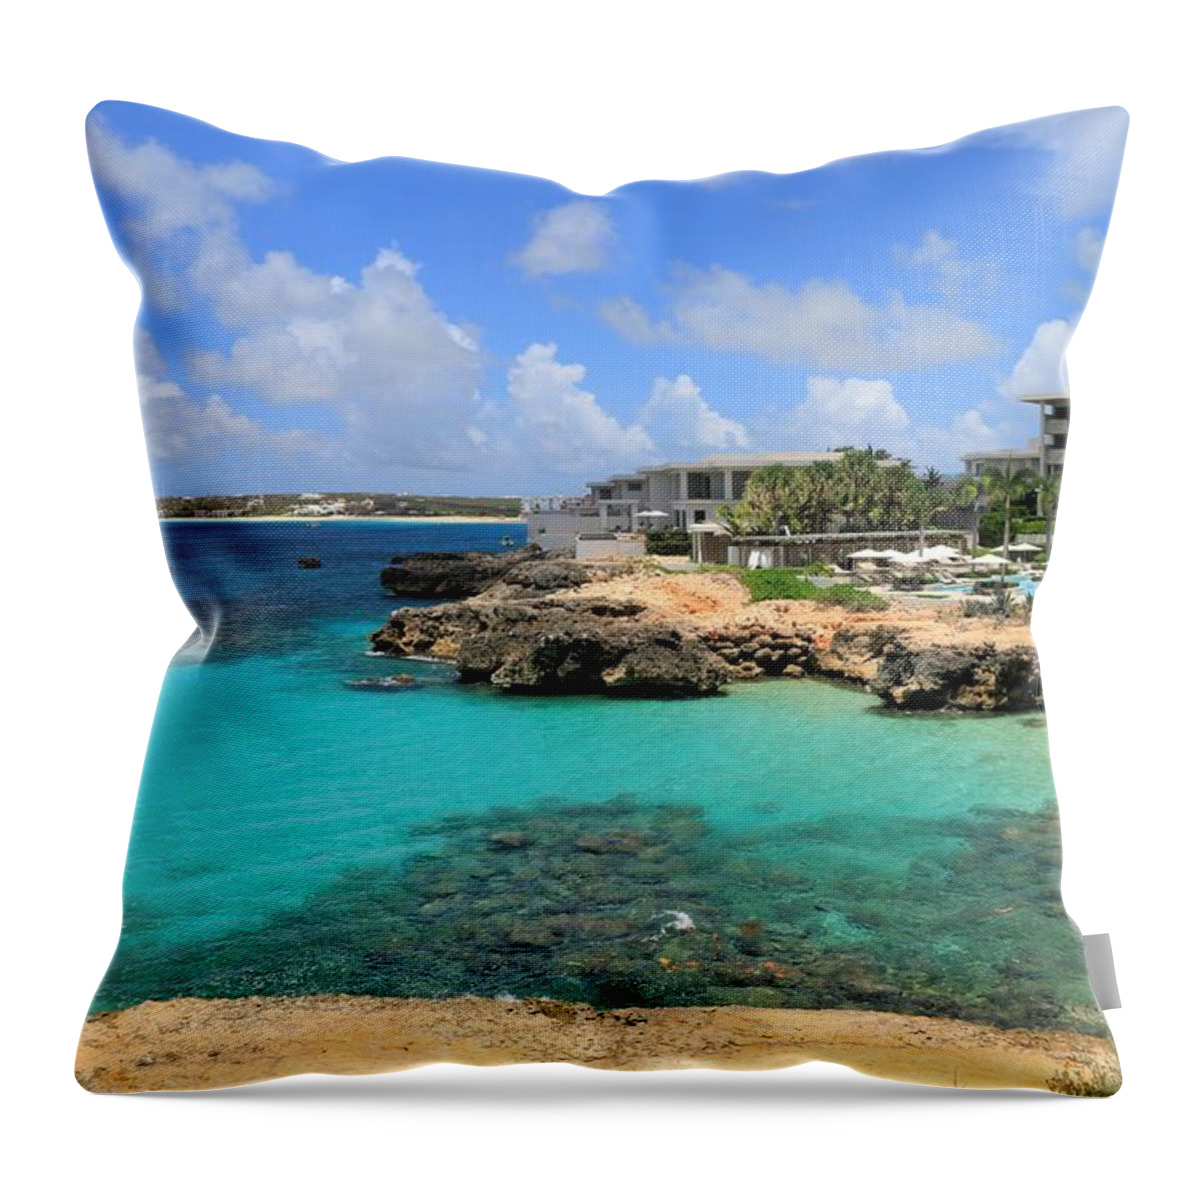 Tropical Throw Pillow featuring the photograph Four Seasons Hotel in Anguilla by Ola Allen